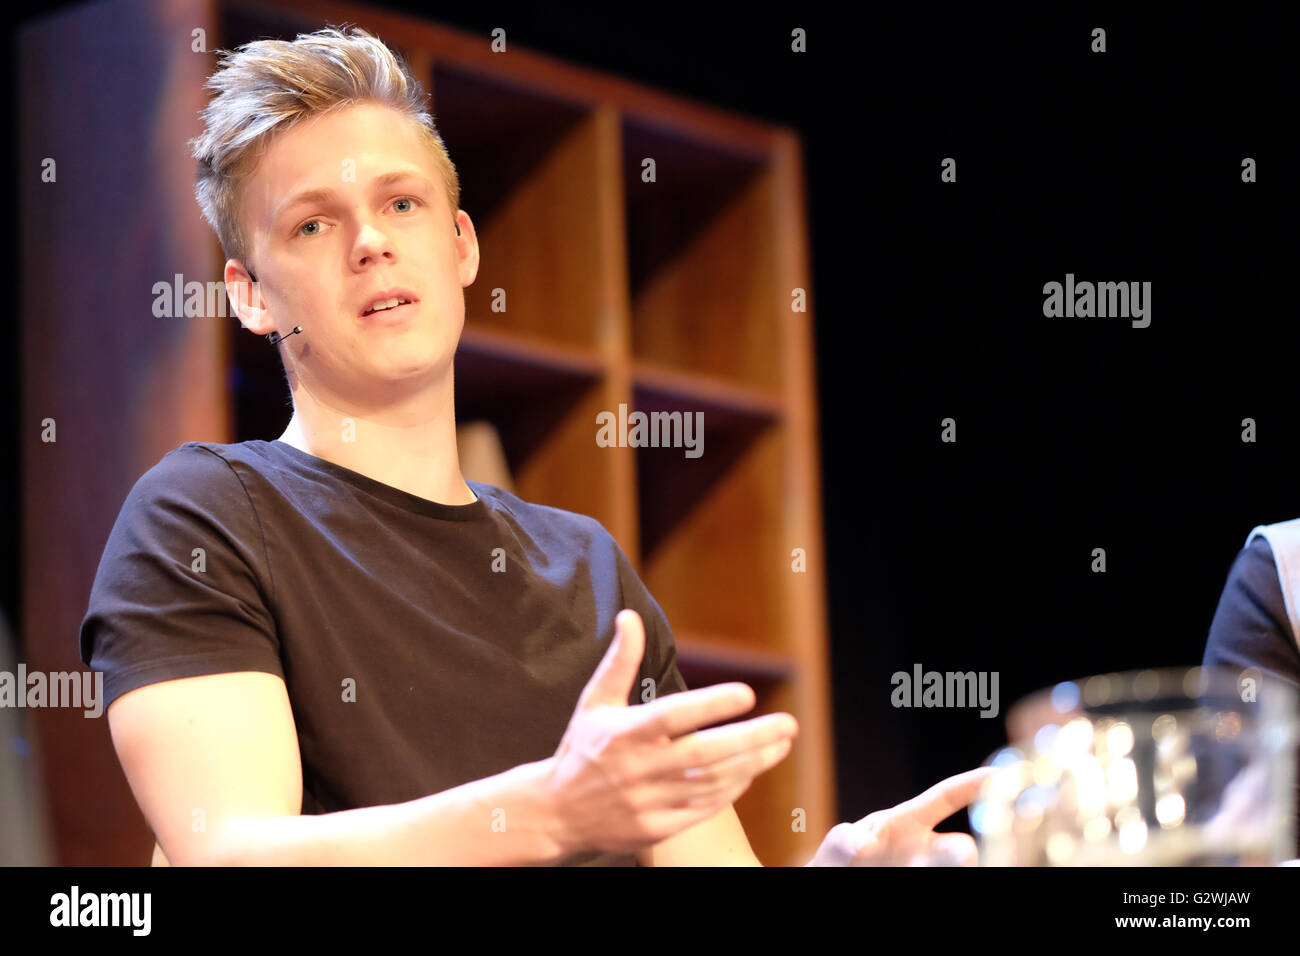 Hay Festival 2016, Wales, UK - Saturday 4th June 2016 -  Caspar Lee the young Youtube and social media sensation on stage to promote his new book called Caspar Lee - The Book. Stock Photo